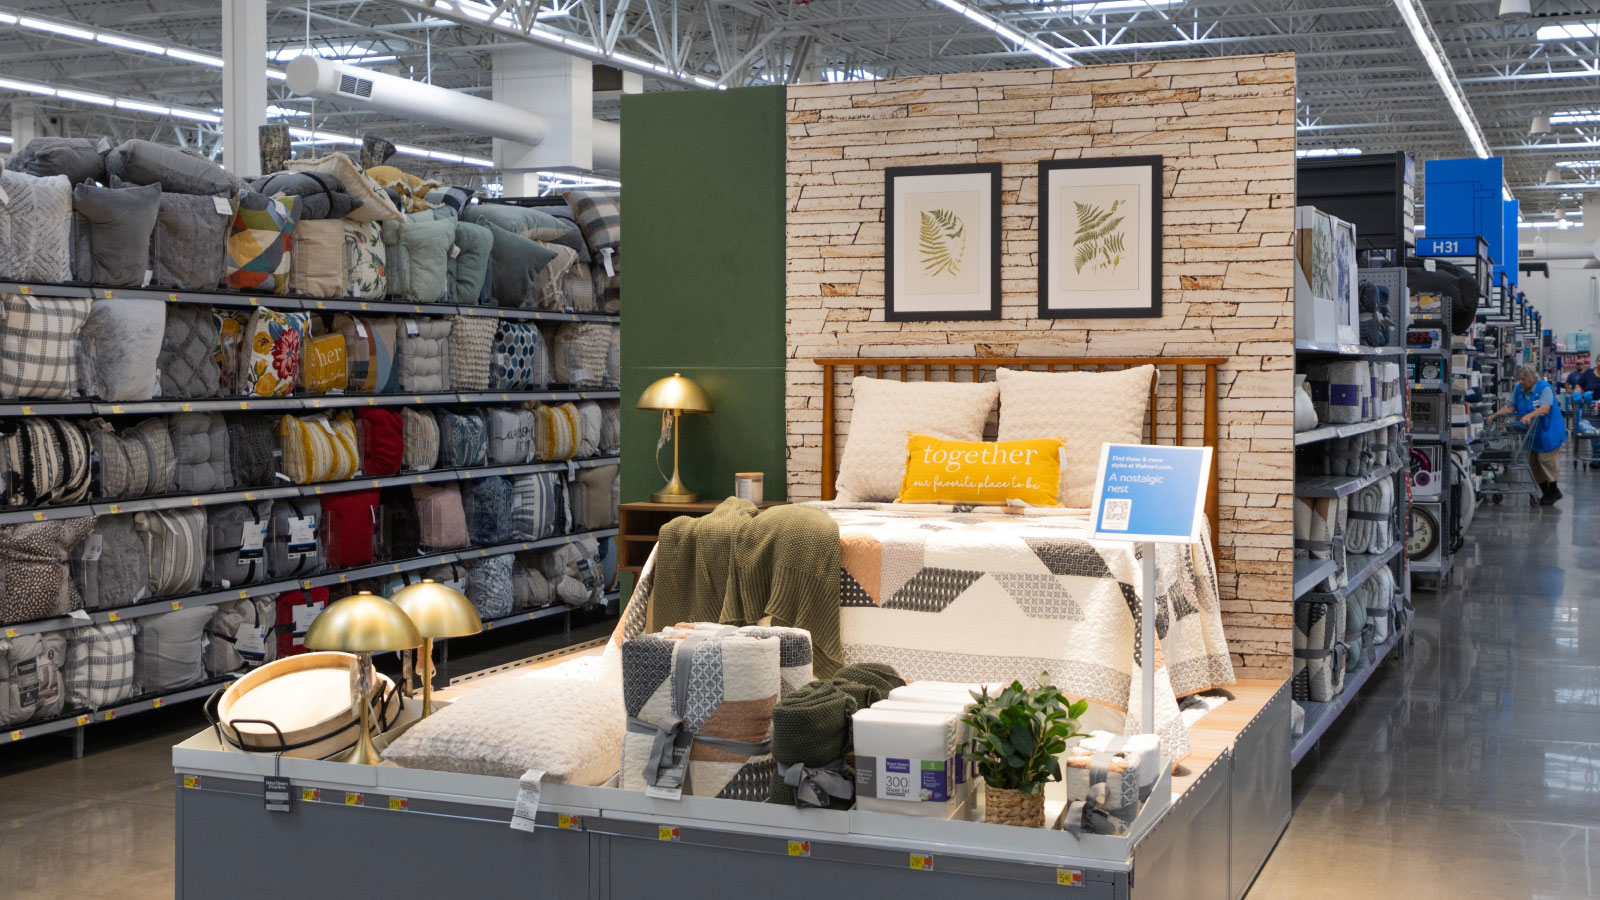 Bedroom decor display in store home department showing bed, bedding, night stand, pillows and accessories.